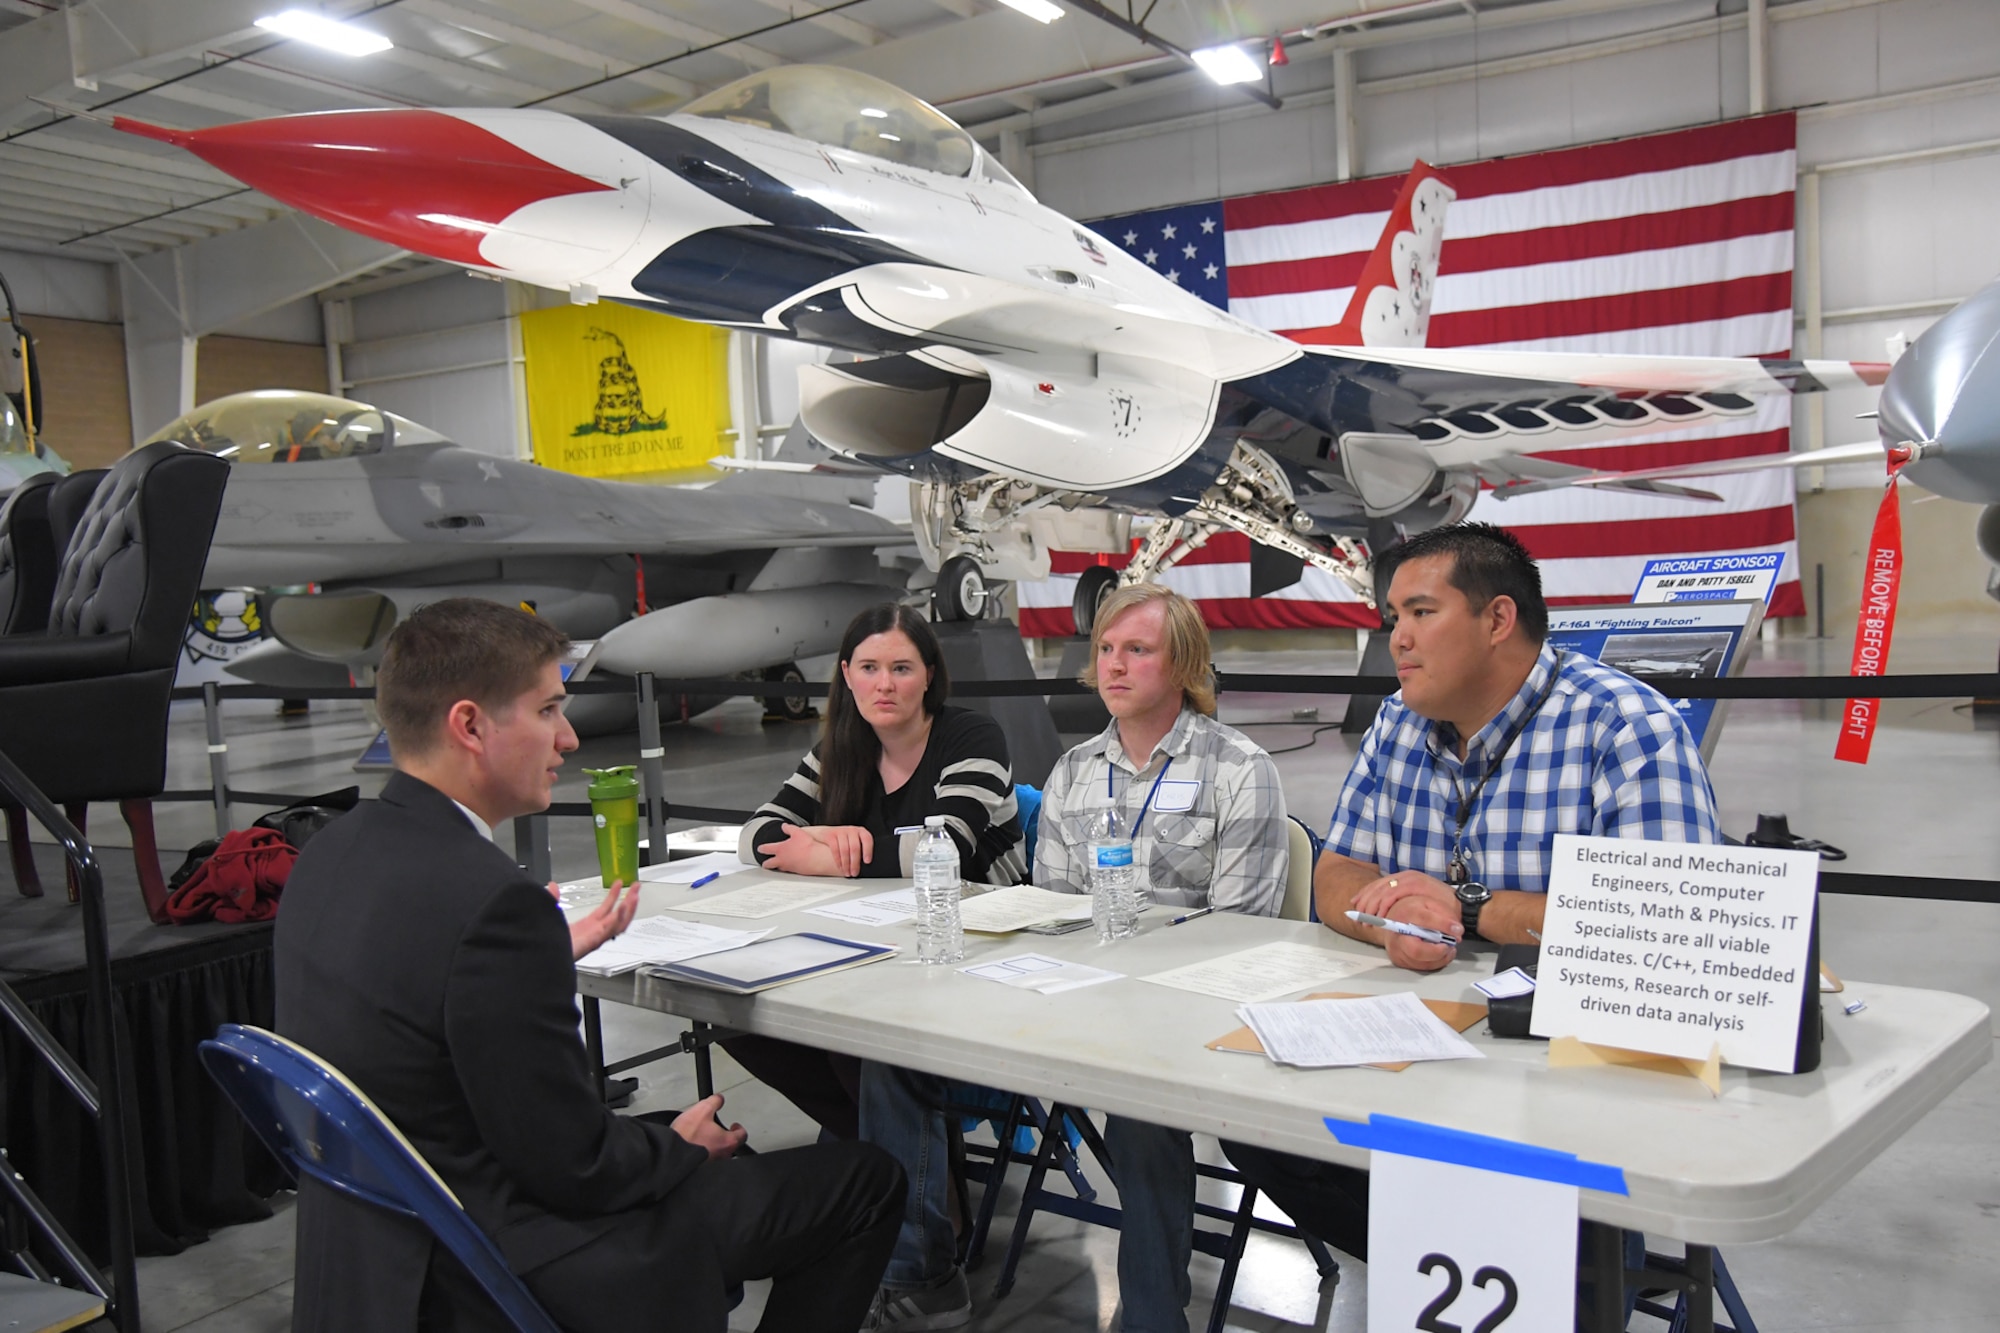 A potential hire is interviewed during a job fair March 20, 2019, at Hill Air Force Base, Utah. The event held at the base’s museum focused on hiring civilian scientists and engineers. Due to workload growth and attrition of a senior workforce, Hill AFB is expecting to hire 200-300 scientists and engineers per year for the next few years. (U.S Air Force photo by Todd Cromar)